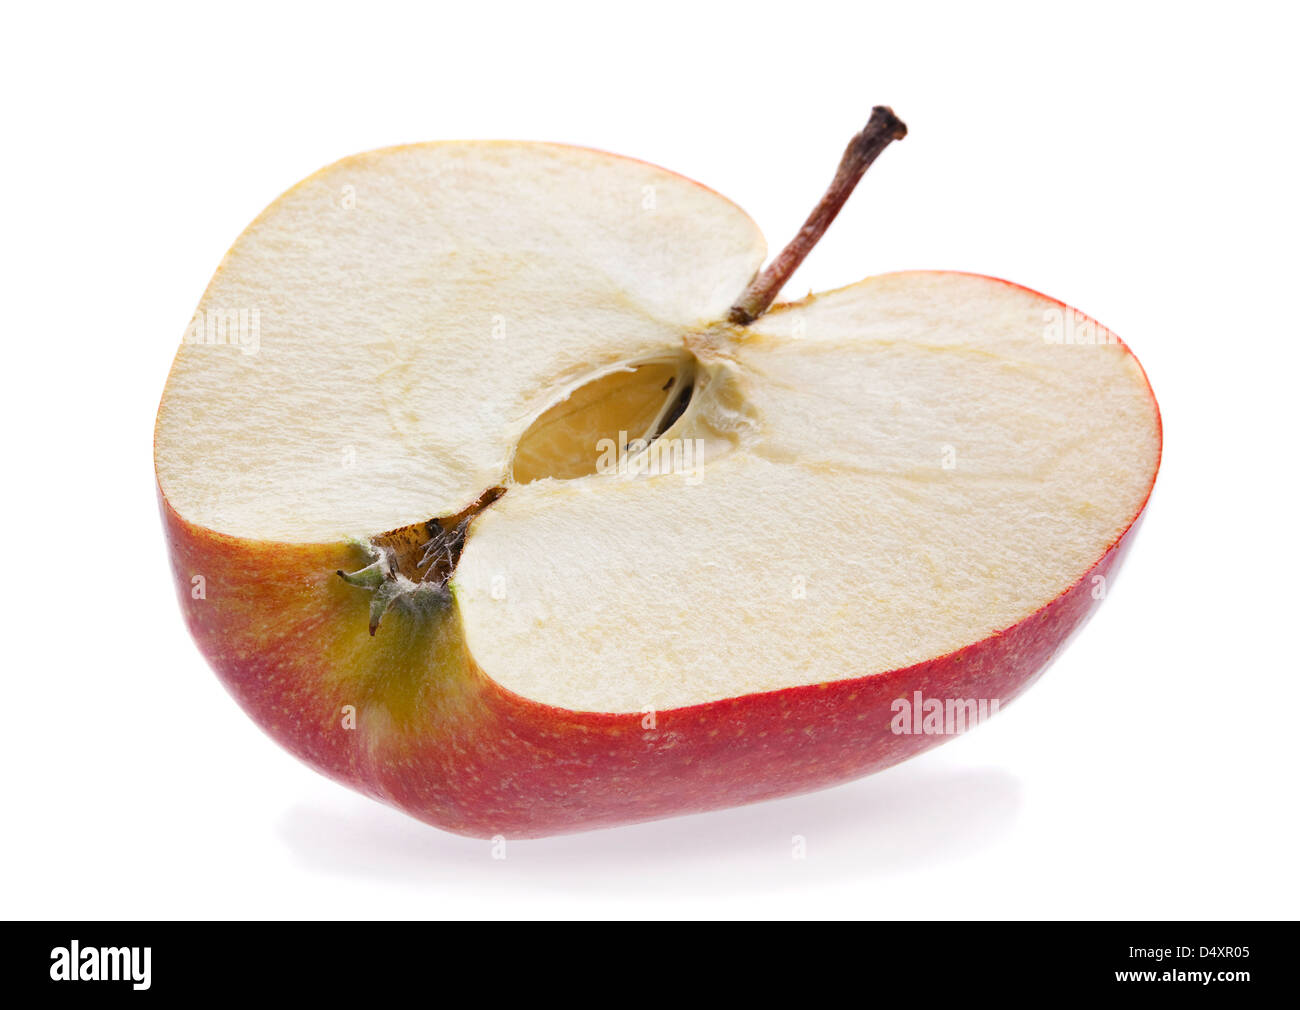 Apple part closeup isolated on white Stock Photo